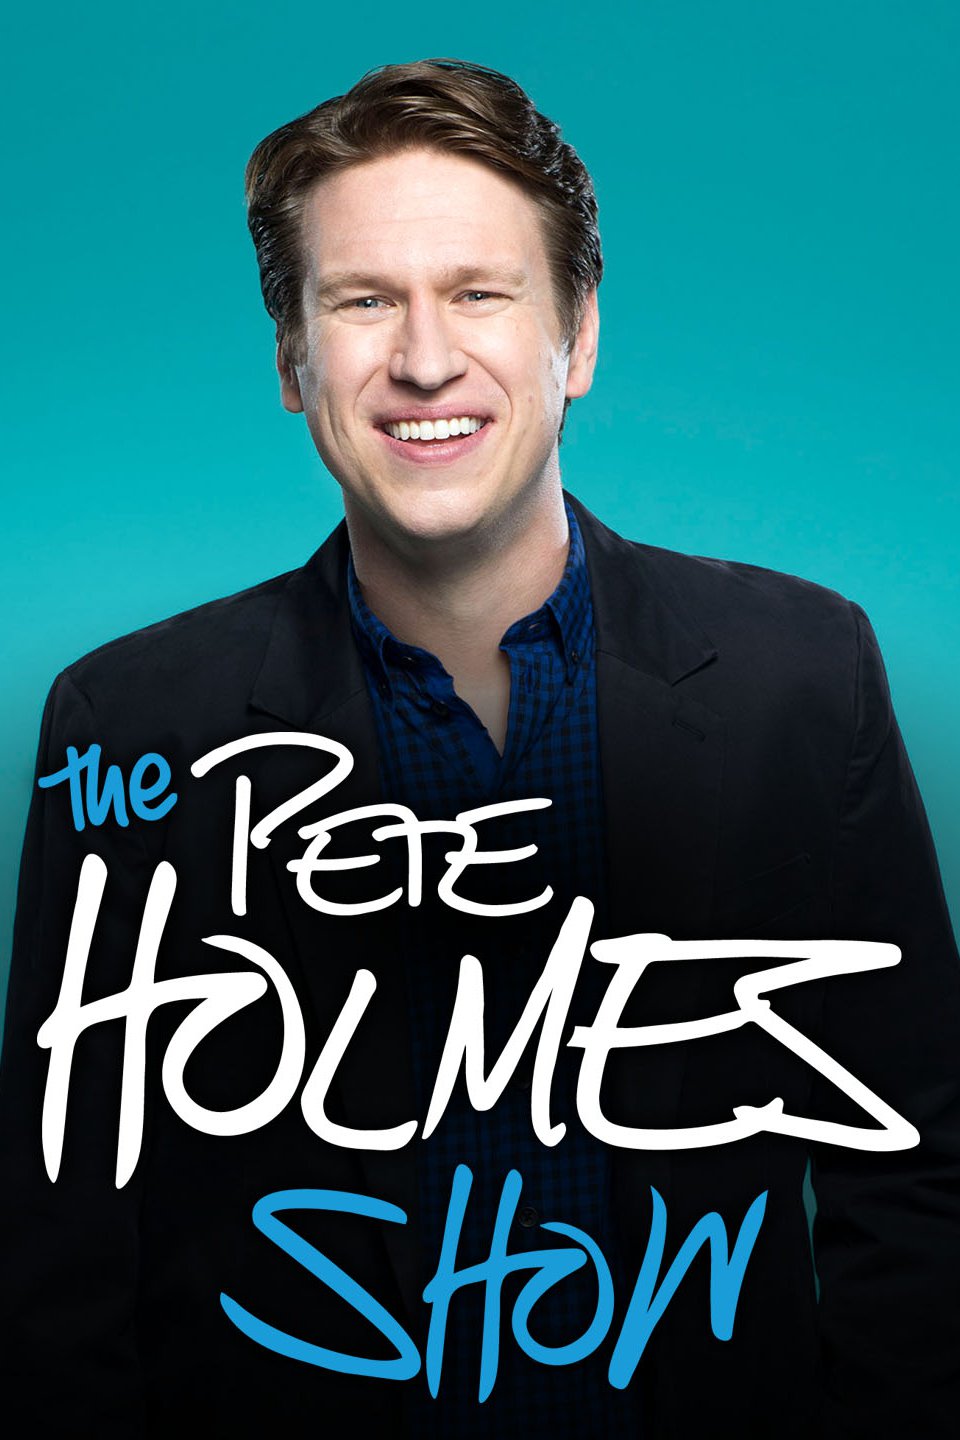 The Pete Holmes Show Rotten Tomatoes